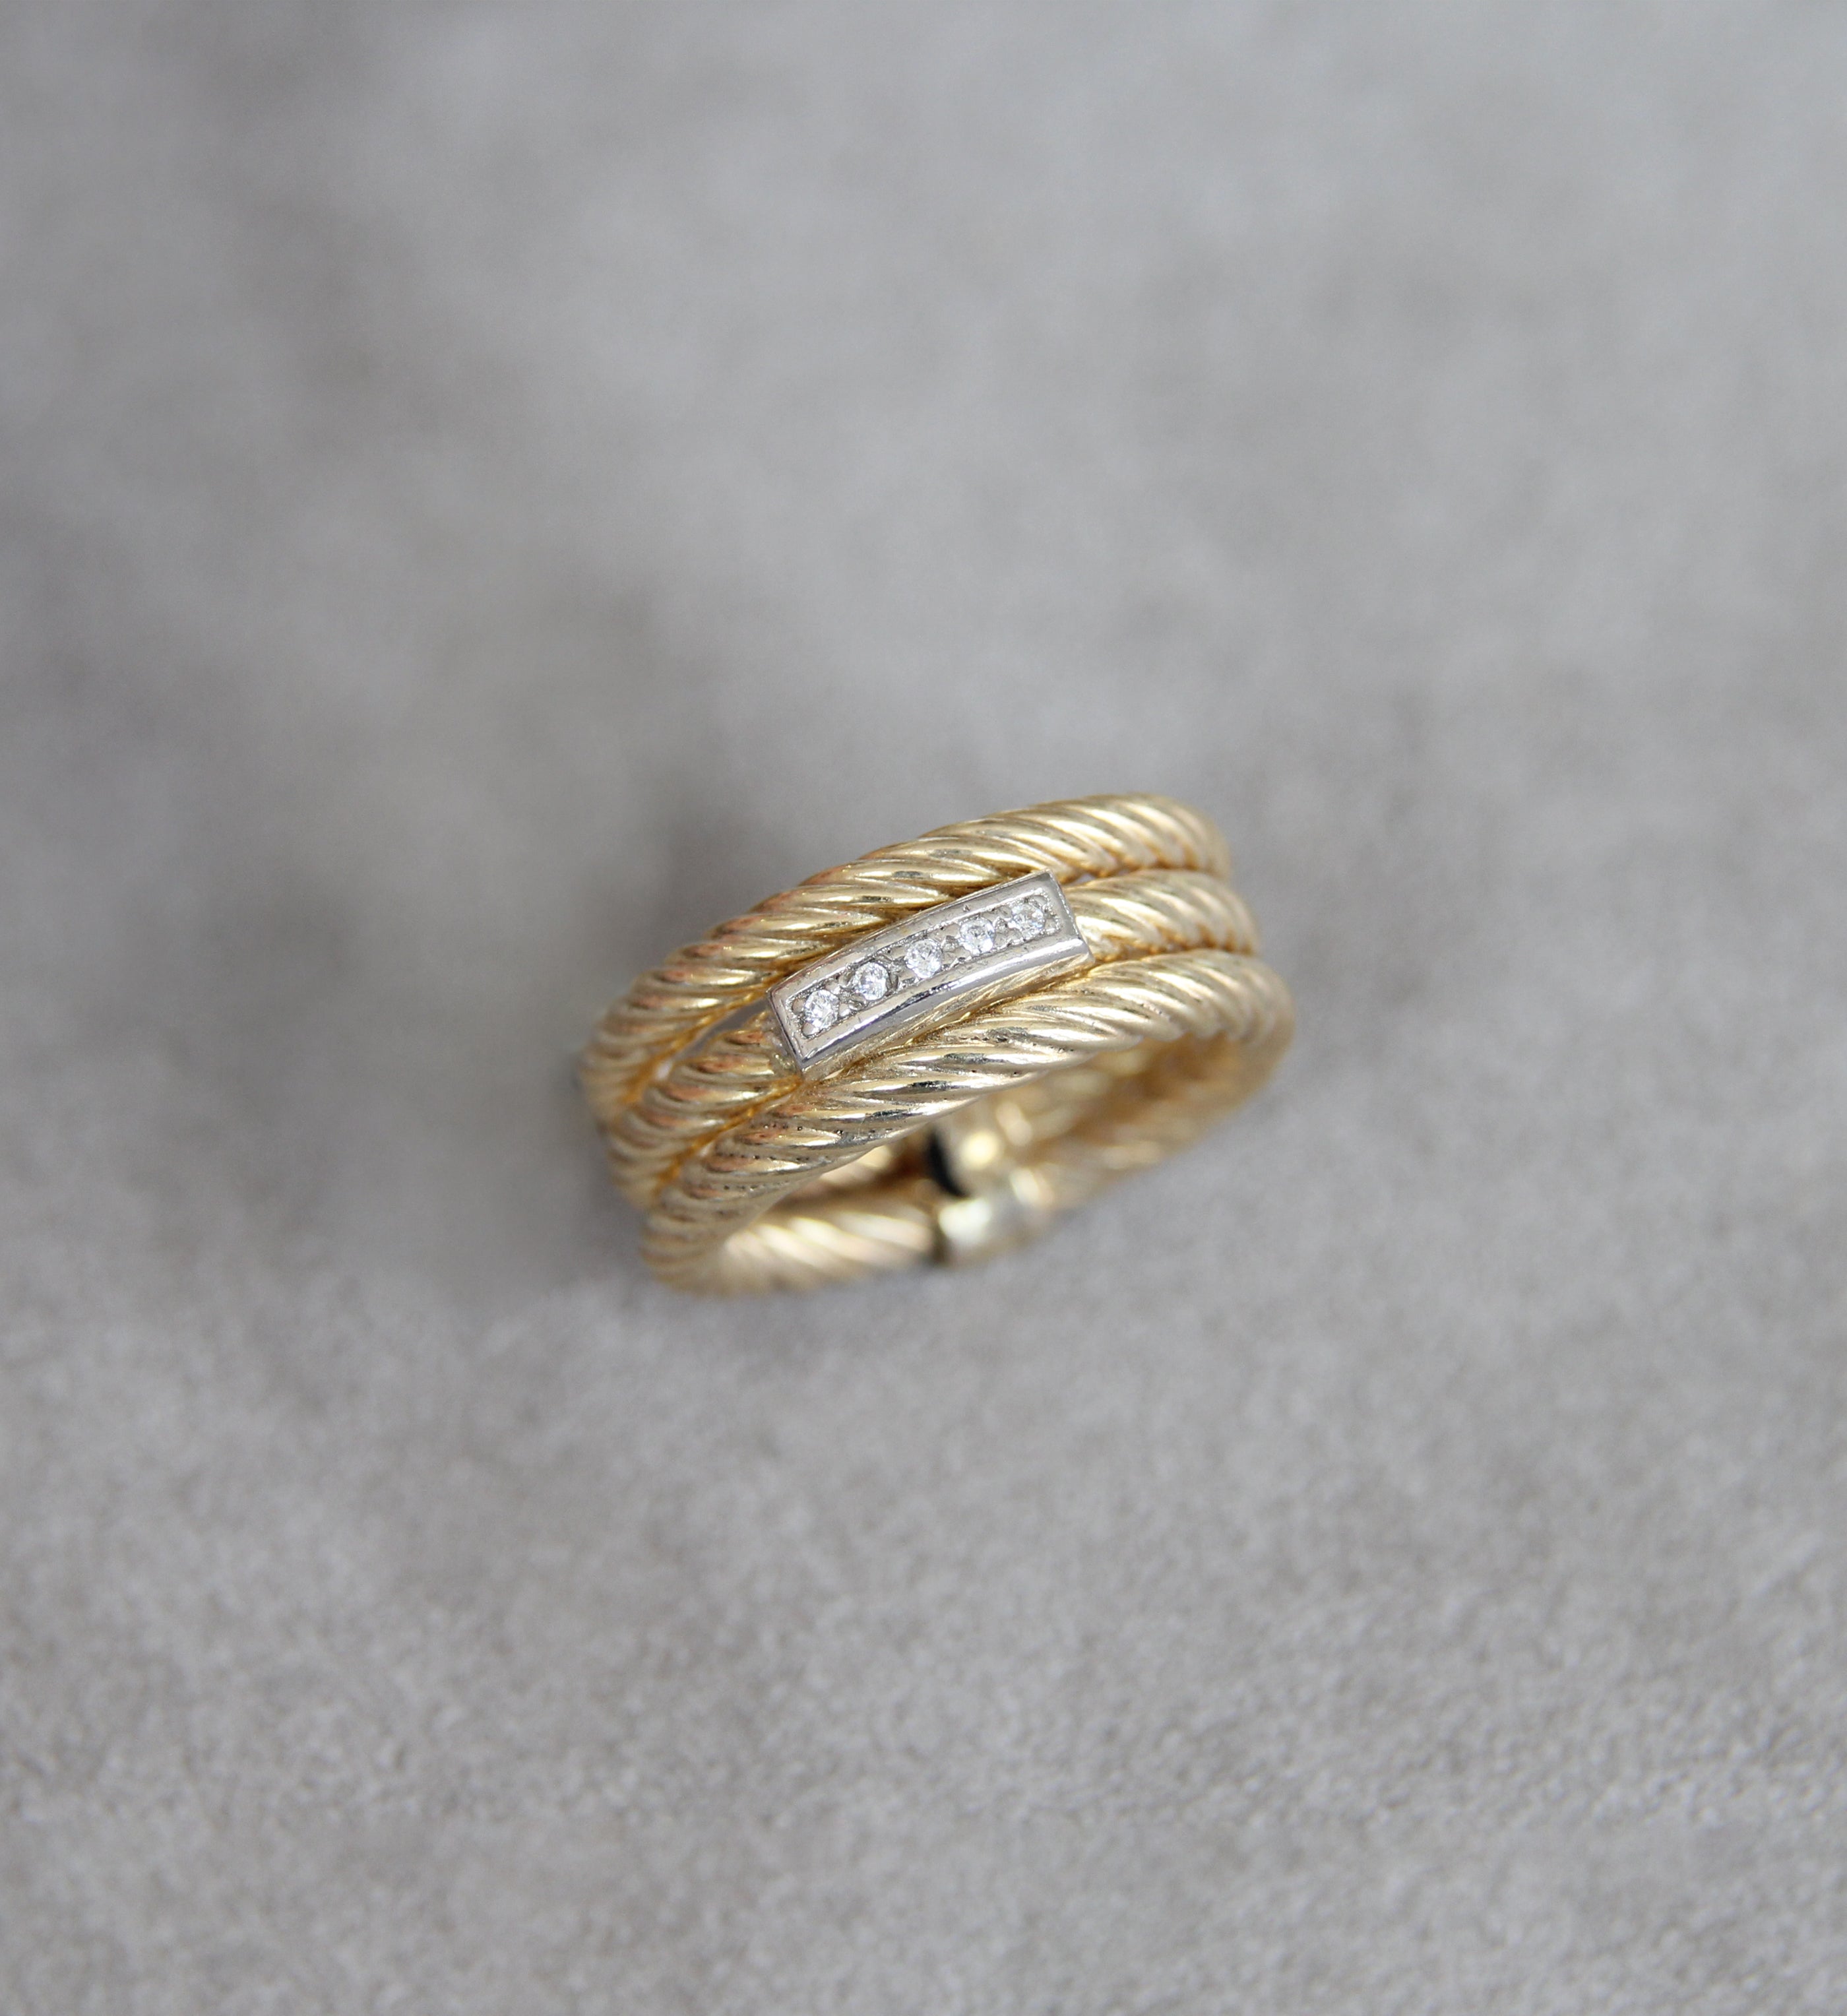 Silver 925 Gold Ring